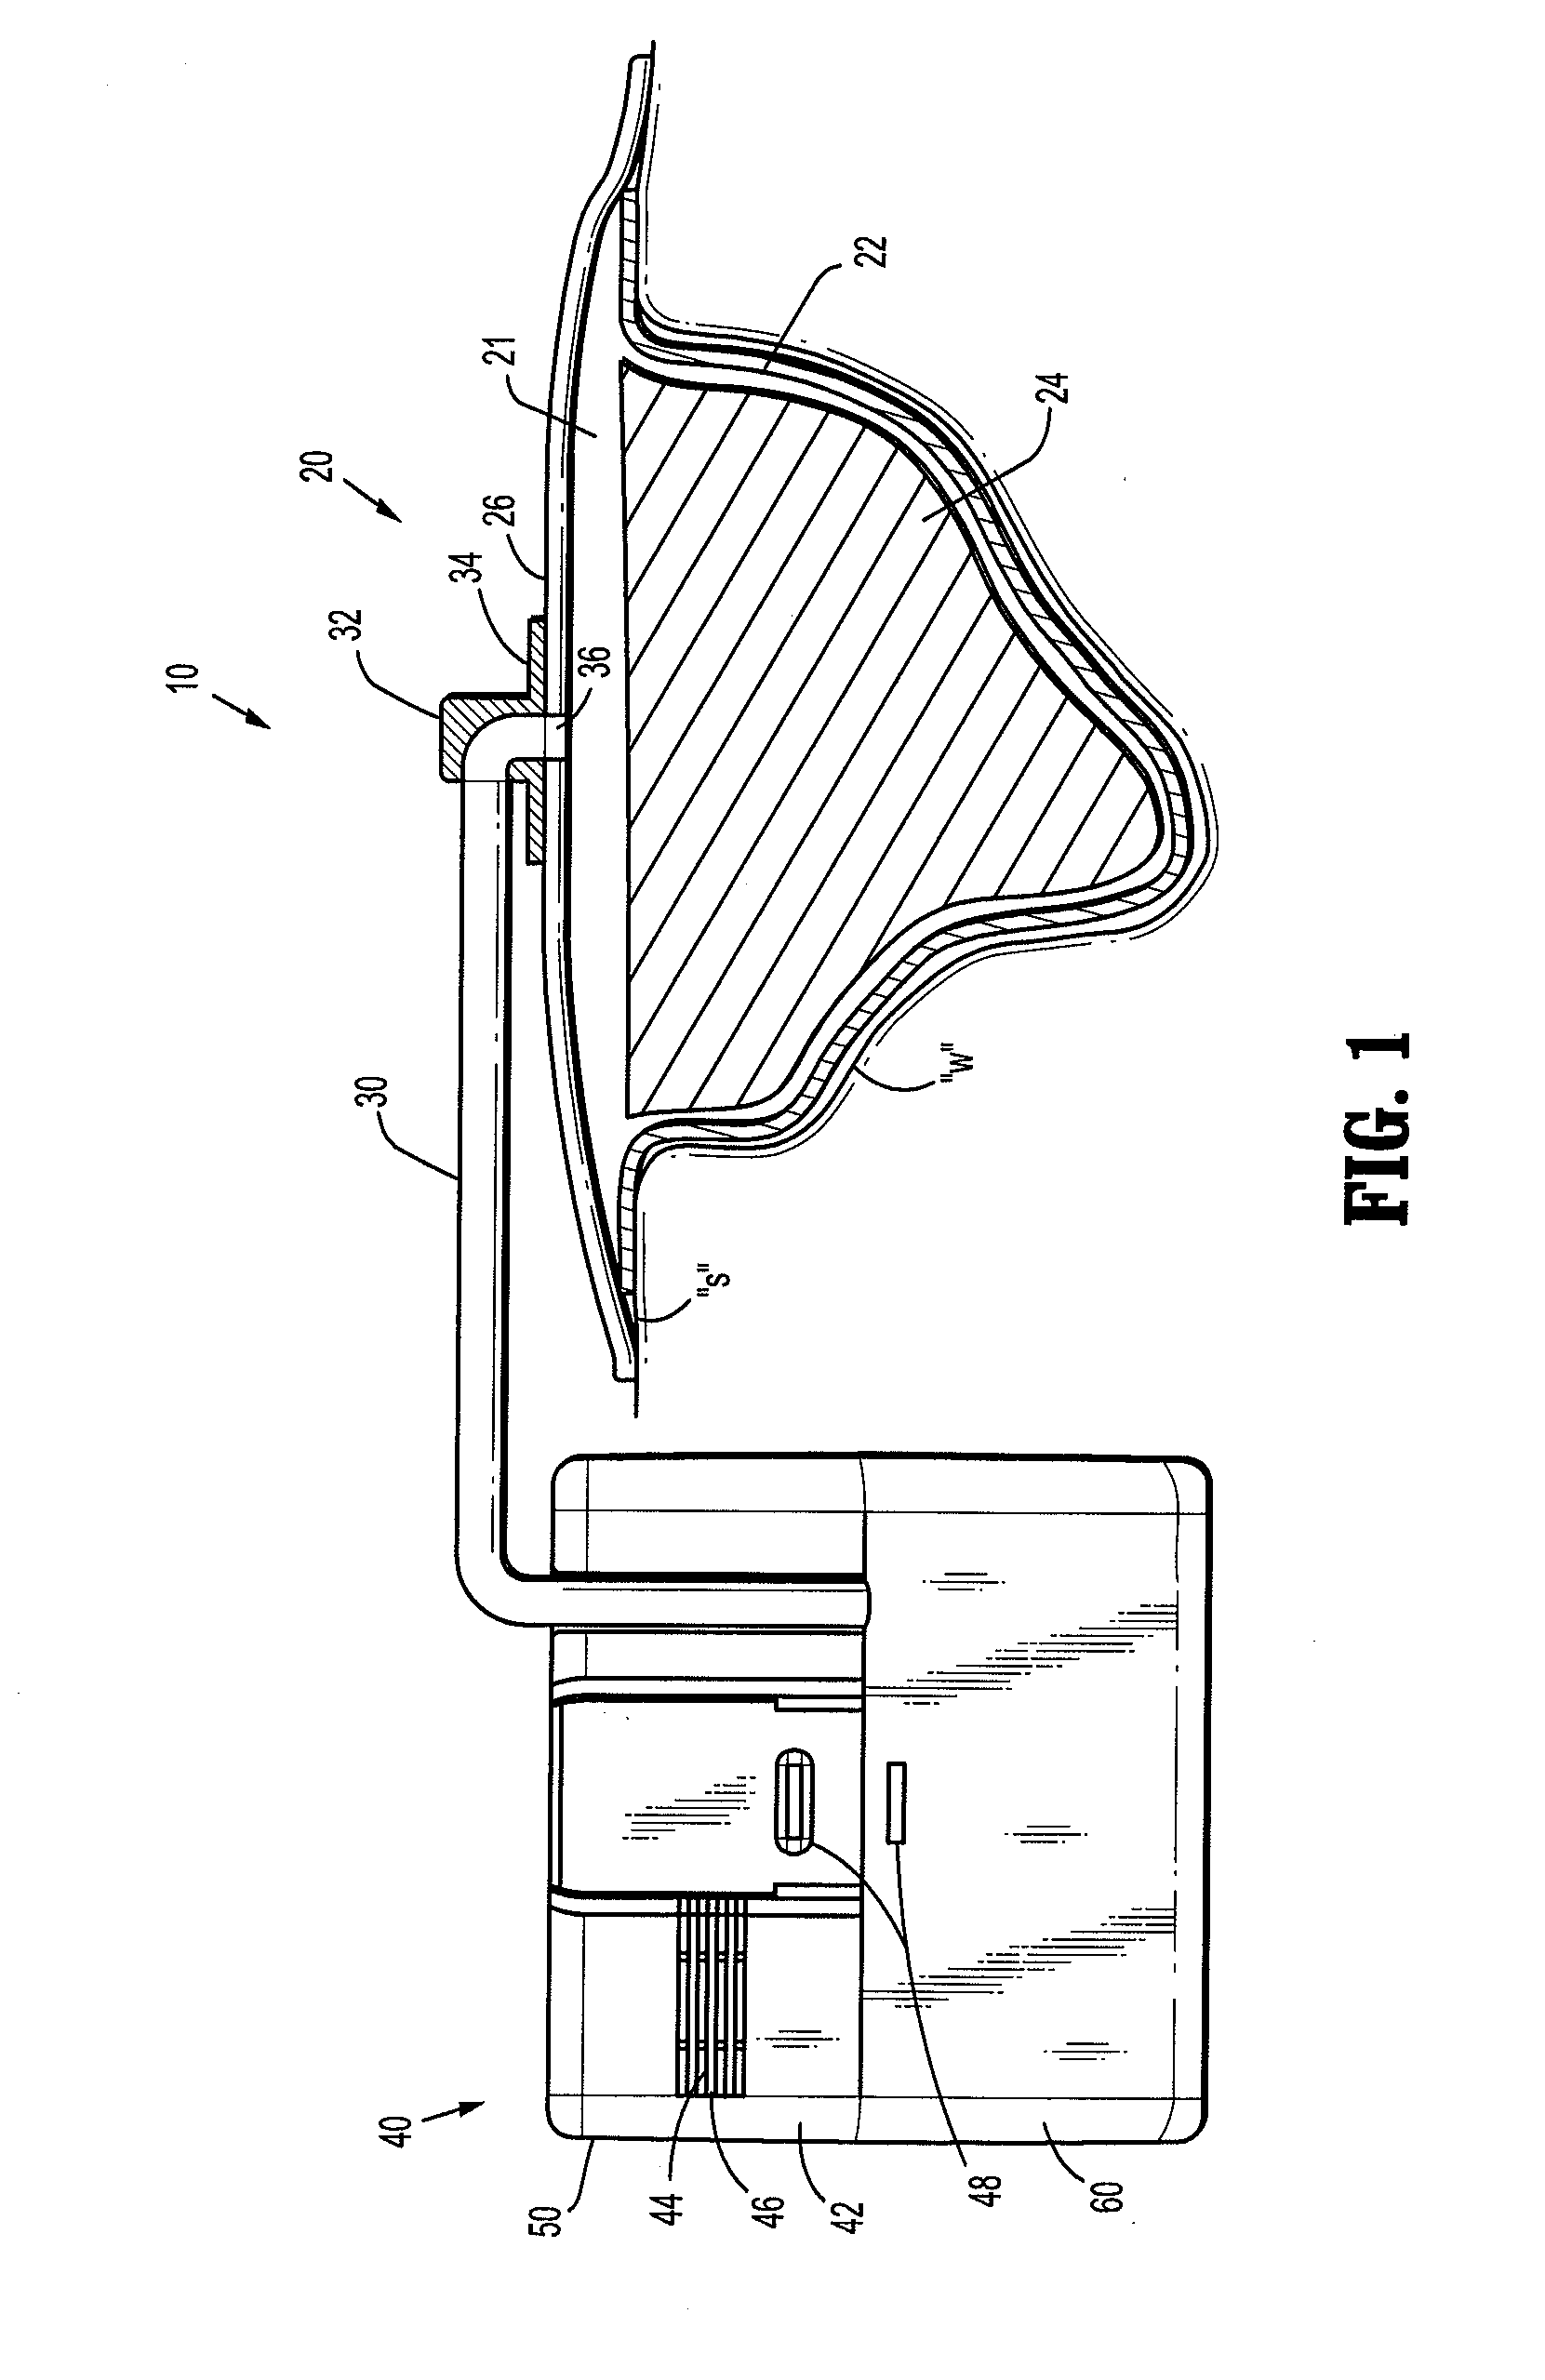 Canister for Receiving Wound Exudate in a Negative Pressure Therapy System